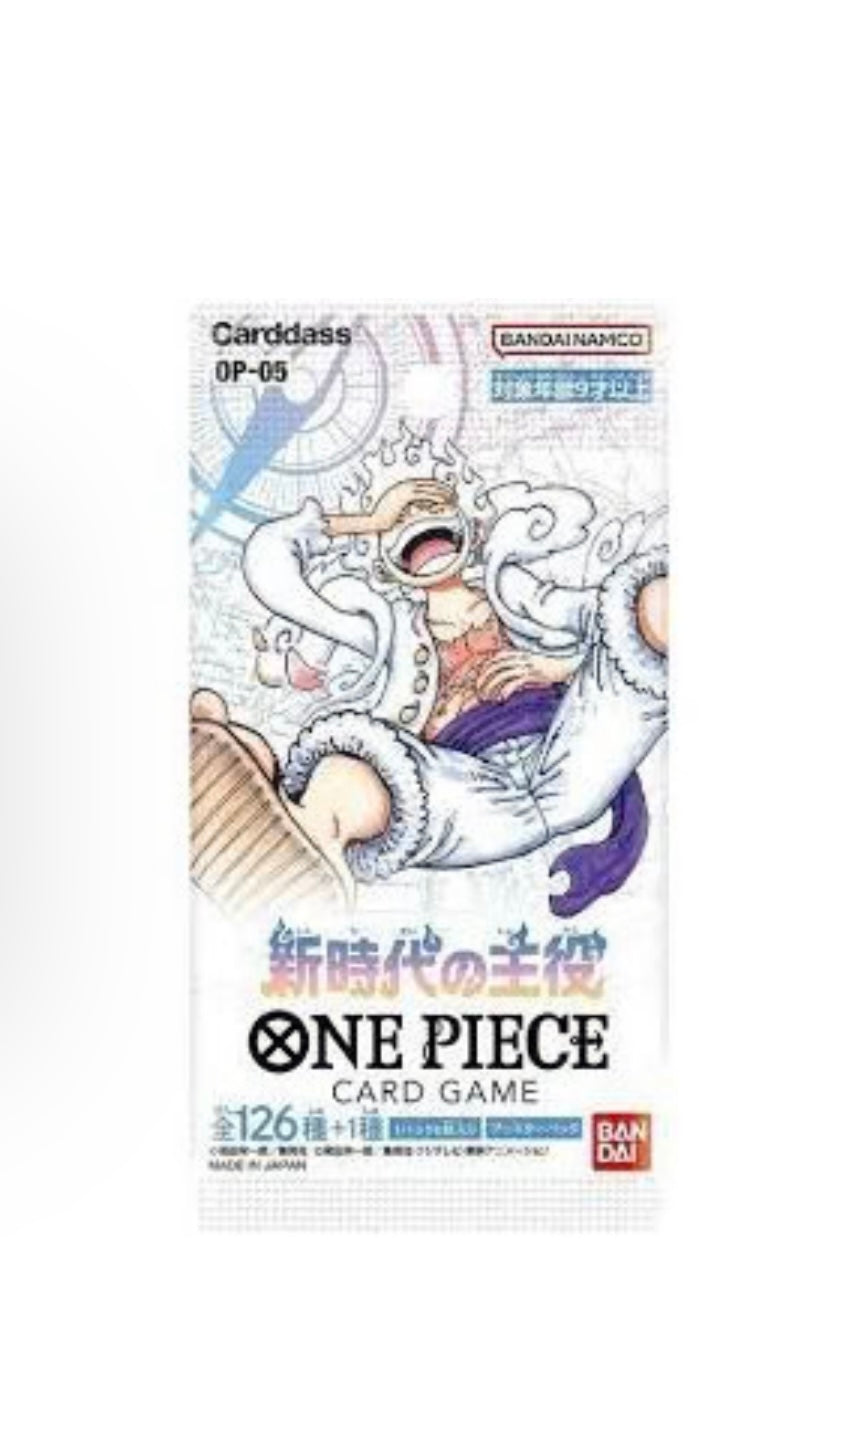 One Piece Trading Card Game Op-05 Awakening of the New Era Japanese Booster Box